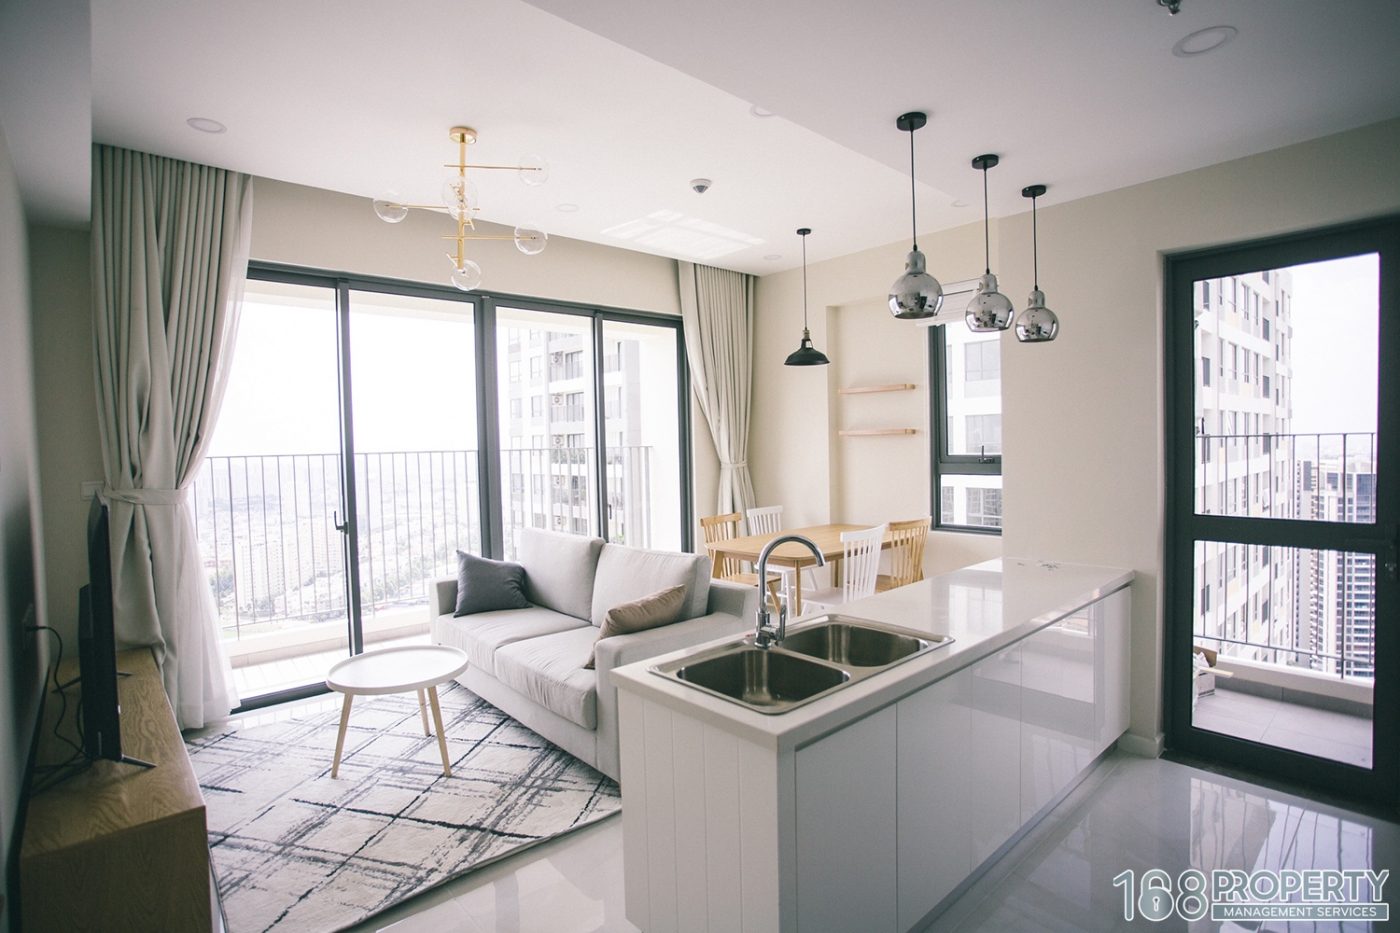 THE NICE LAYOUT OPEN KITCHEN 02 VIEWS APARTMENT IN  MASTERI AN PHU